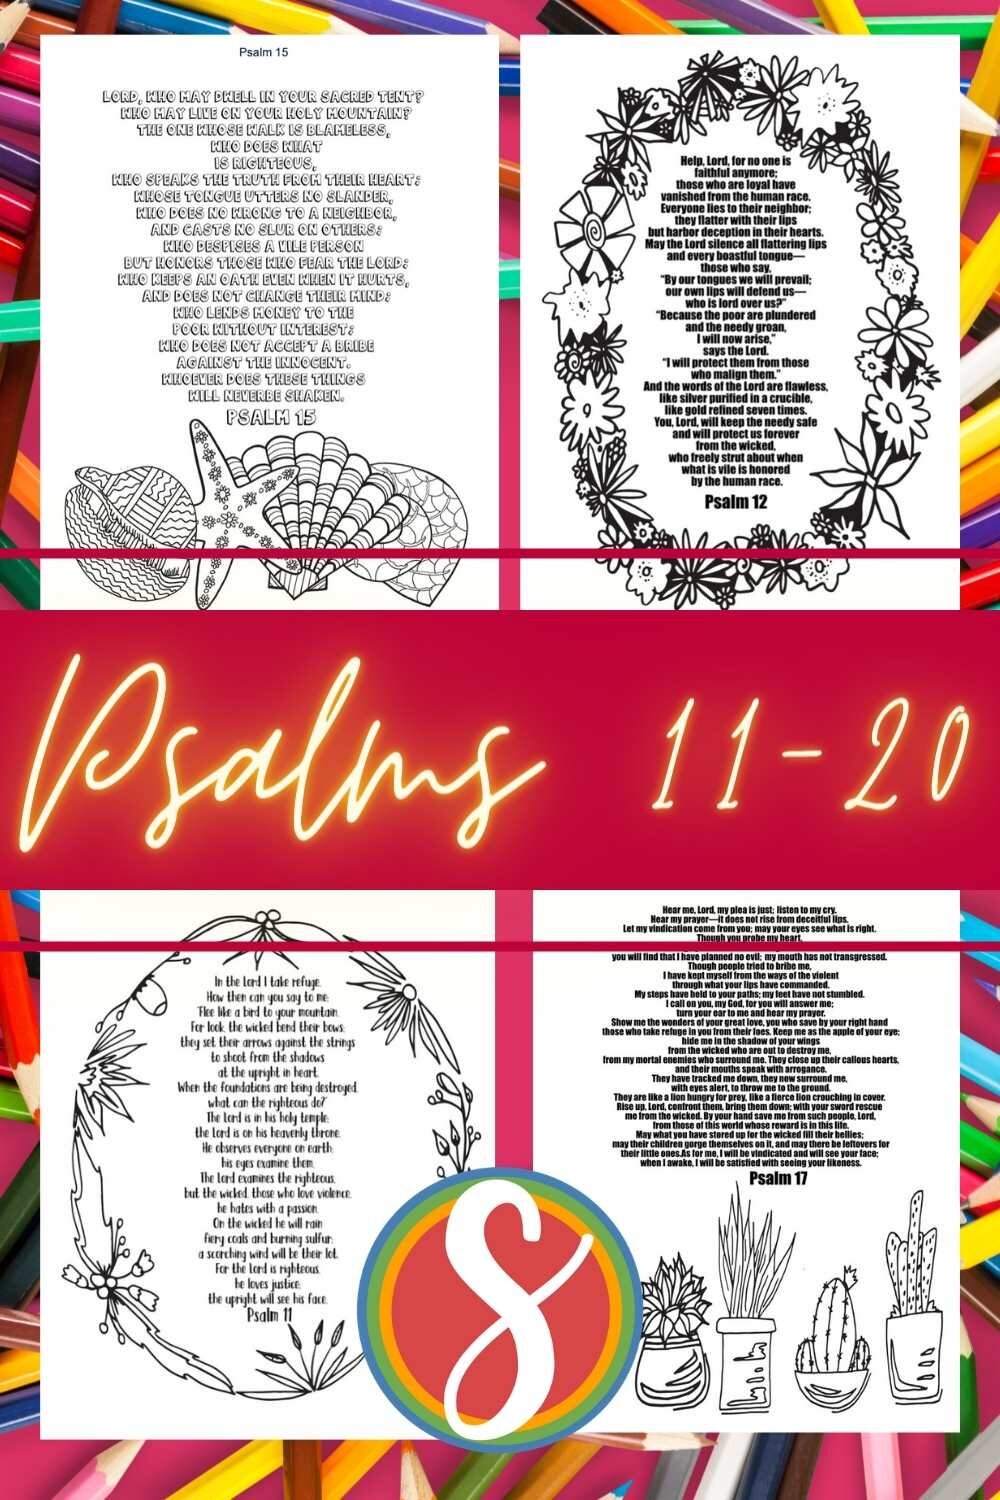 Free Psalm 11-20 coloring pages from Stevie doodles - a coloring page for every psalm